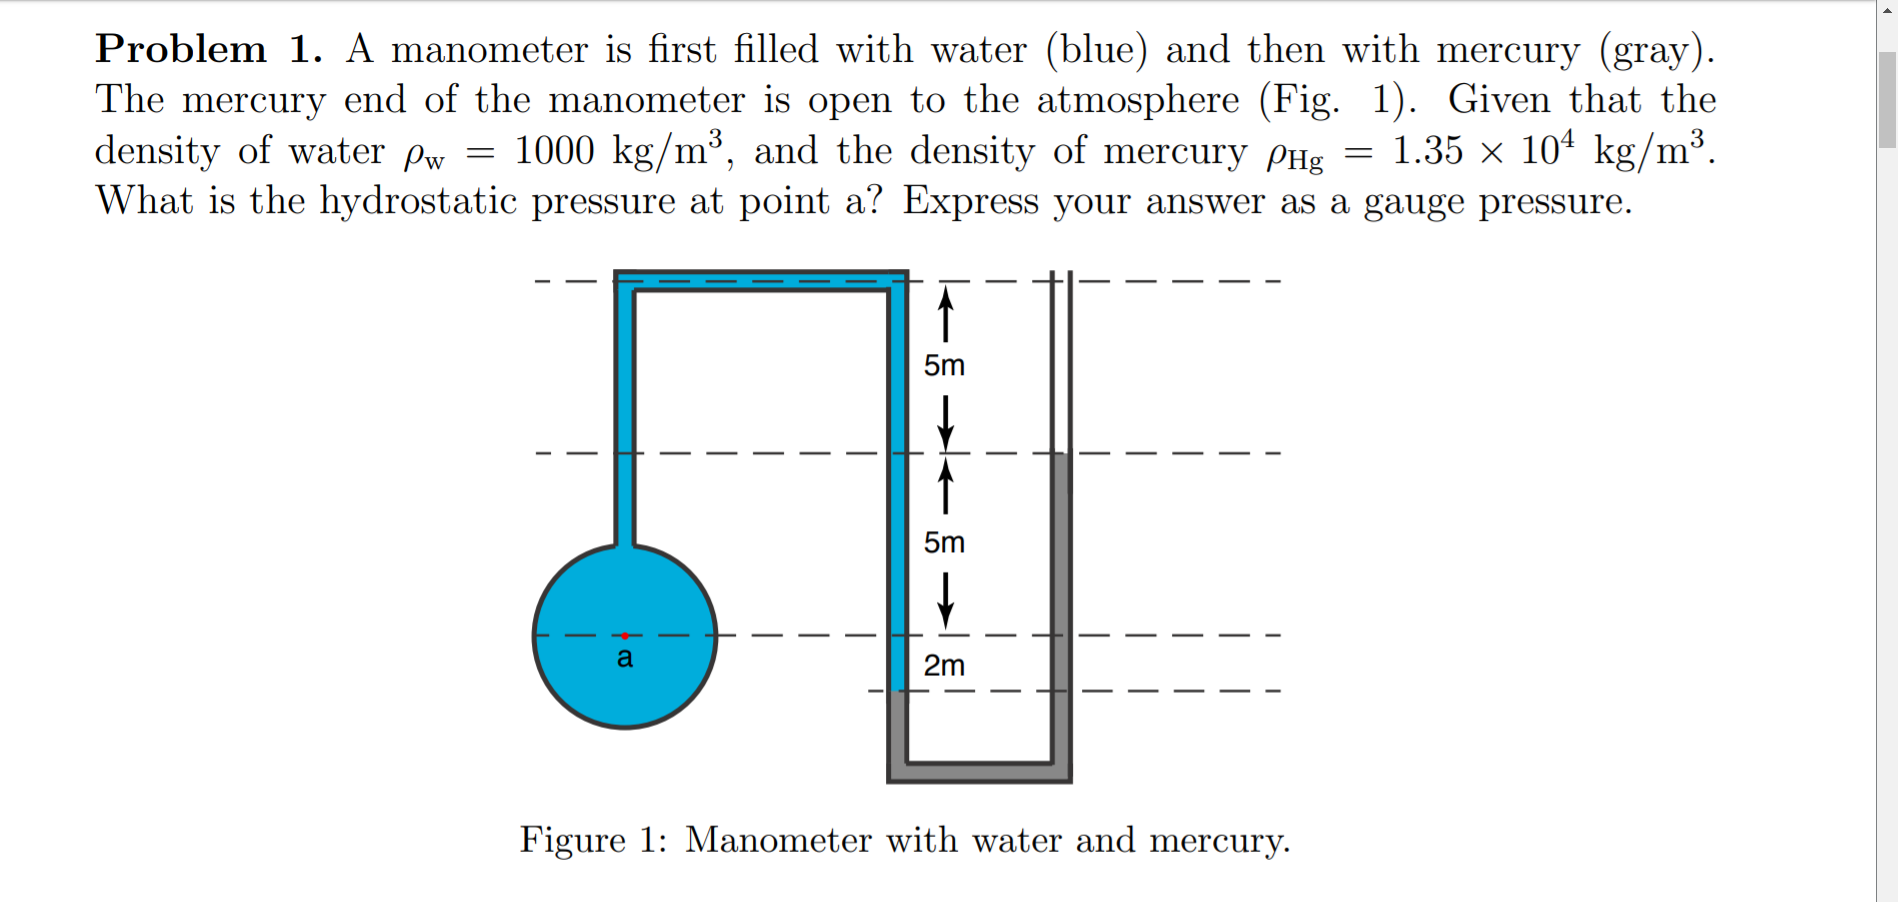 Problem 1. A manometer is first filled with water (blue) and then with mercury (gray).
The mercury end of the manometer is open to the atmosphere (Fig. 1). Given that the
density of water Pw = 1000 kg/m³, and the density of mercury PHg = 1.35 × 10ª kg/m³.
What is the hydrostatic pressure at point a? Express your answer as a gauge pressure.
5m
5m
2m
Figure 1: Manometer with water and mercury.
